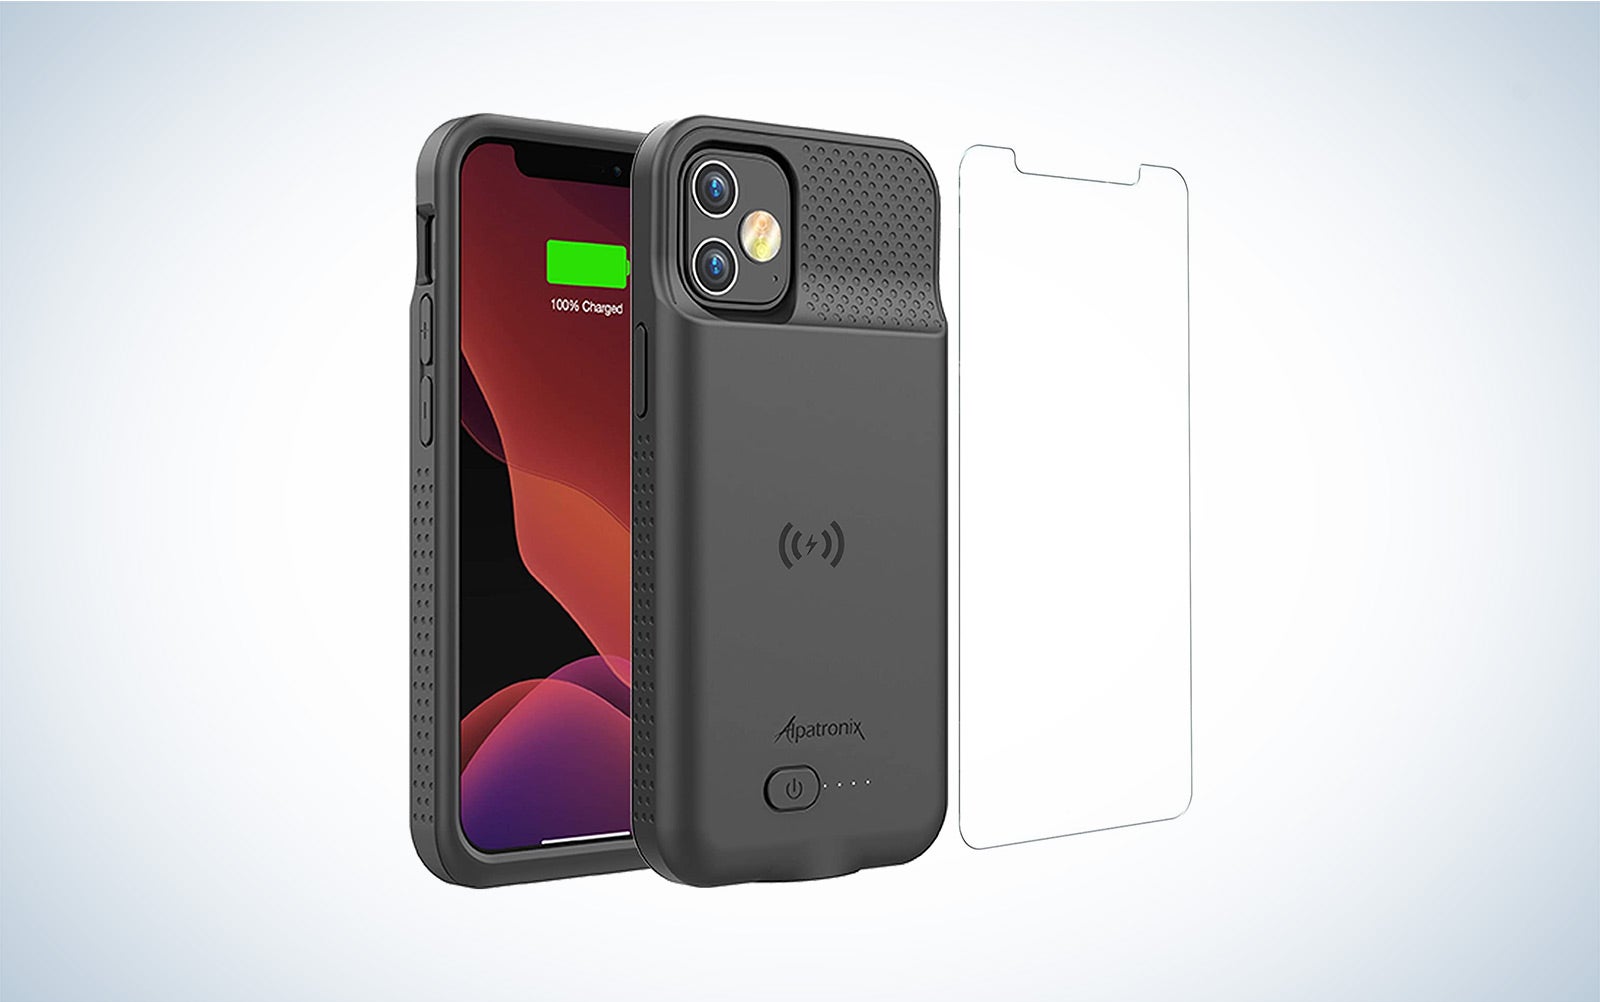 The Alpatronix Store Battery Case is the best charging phone case.